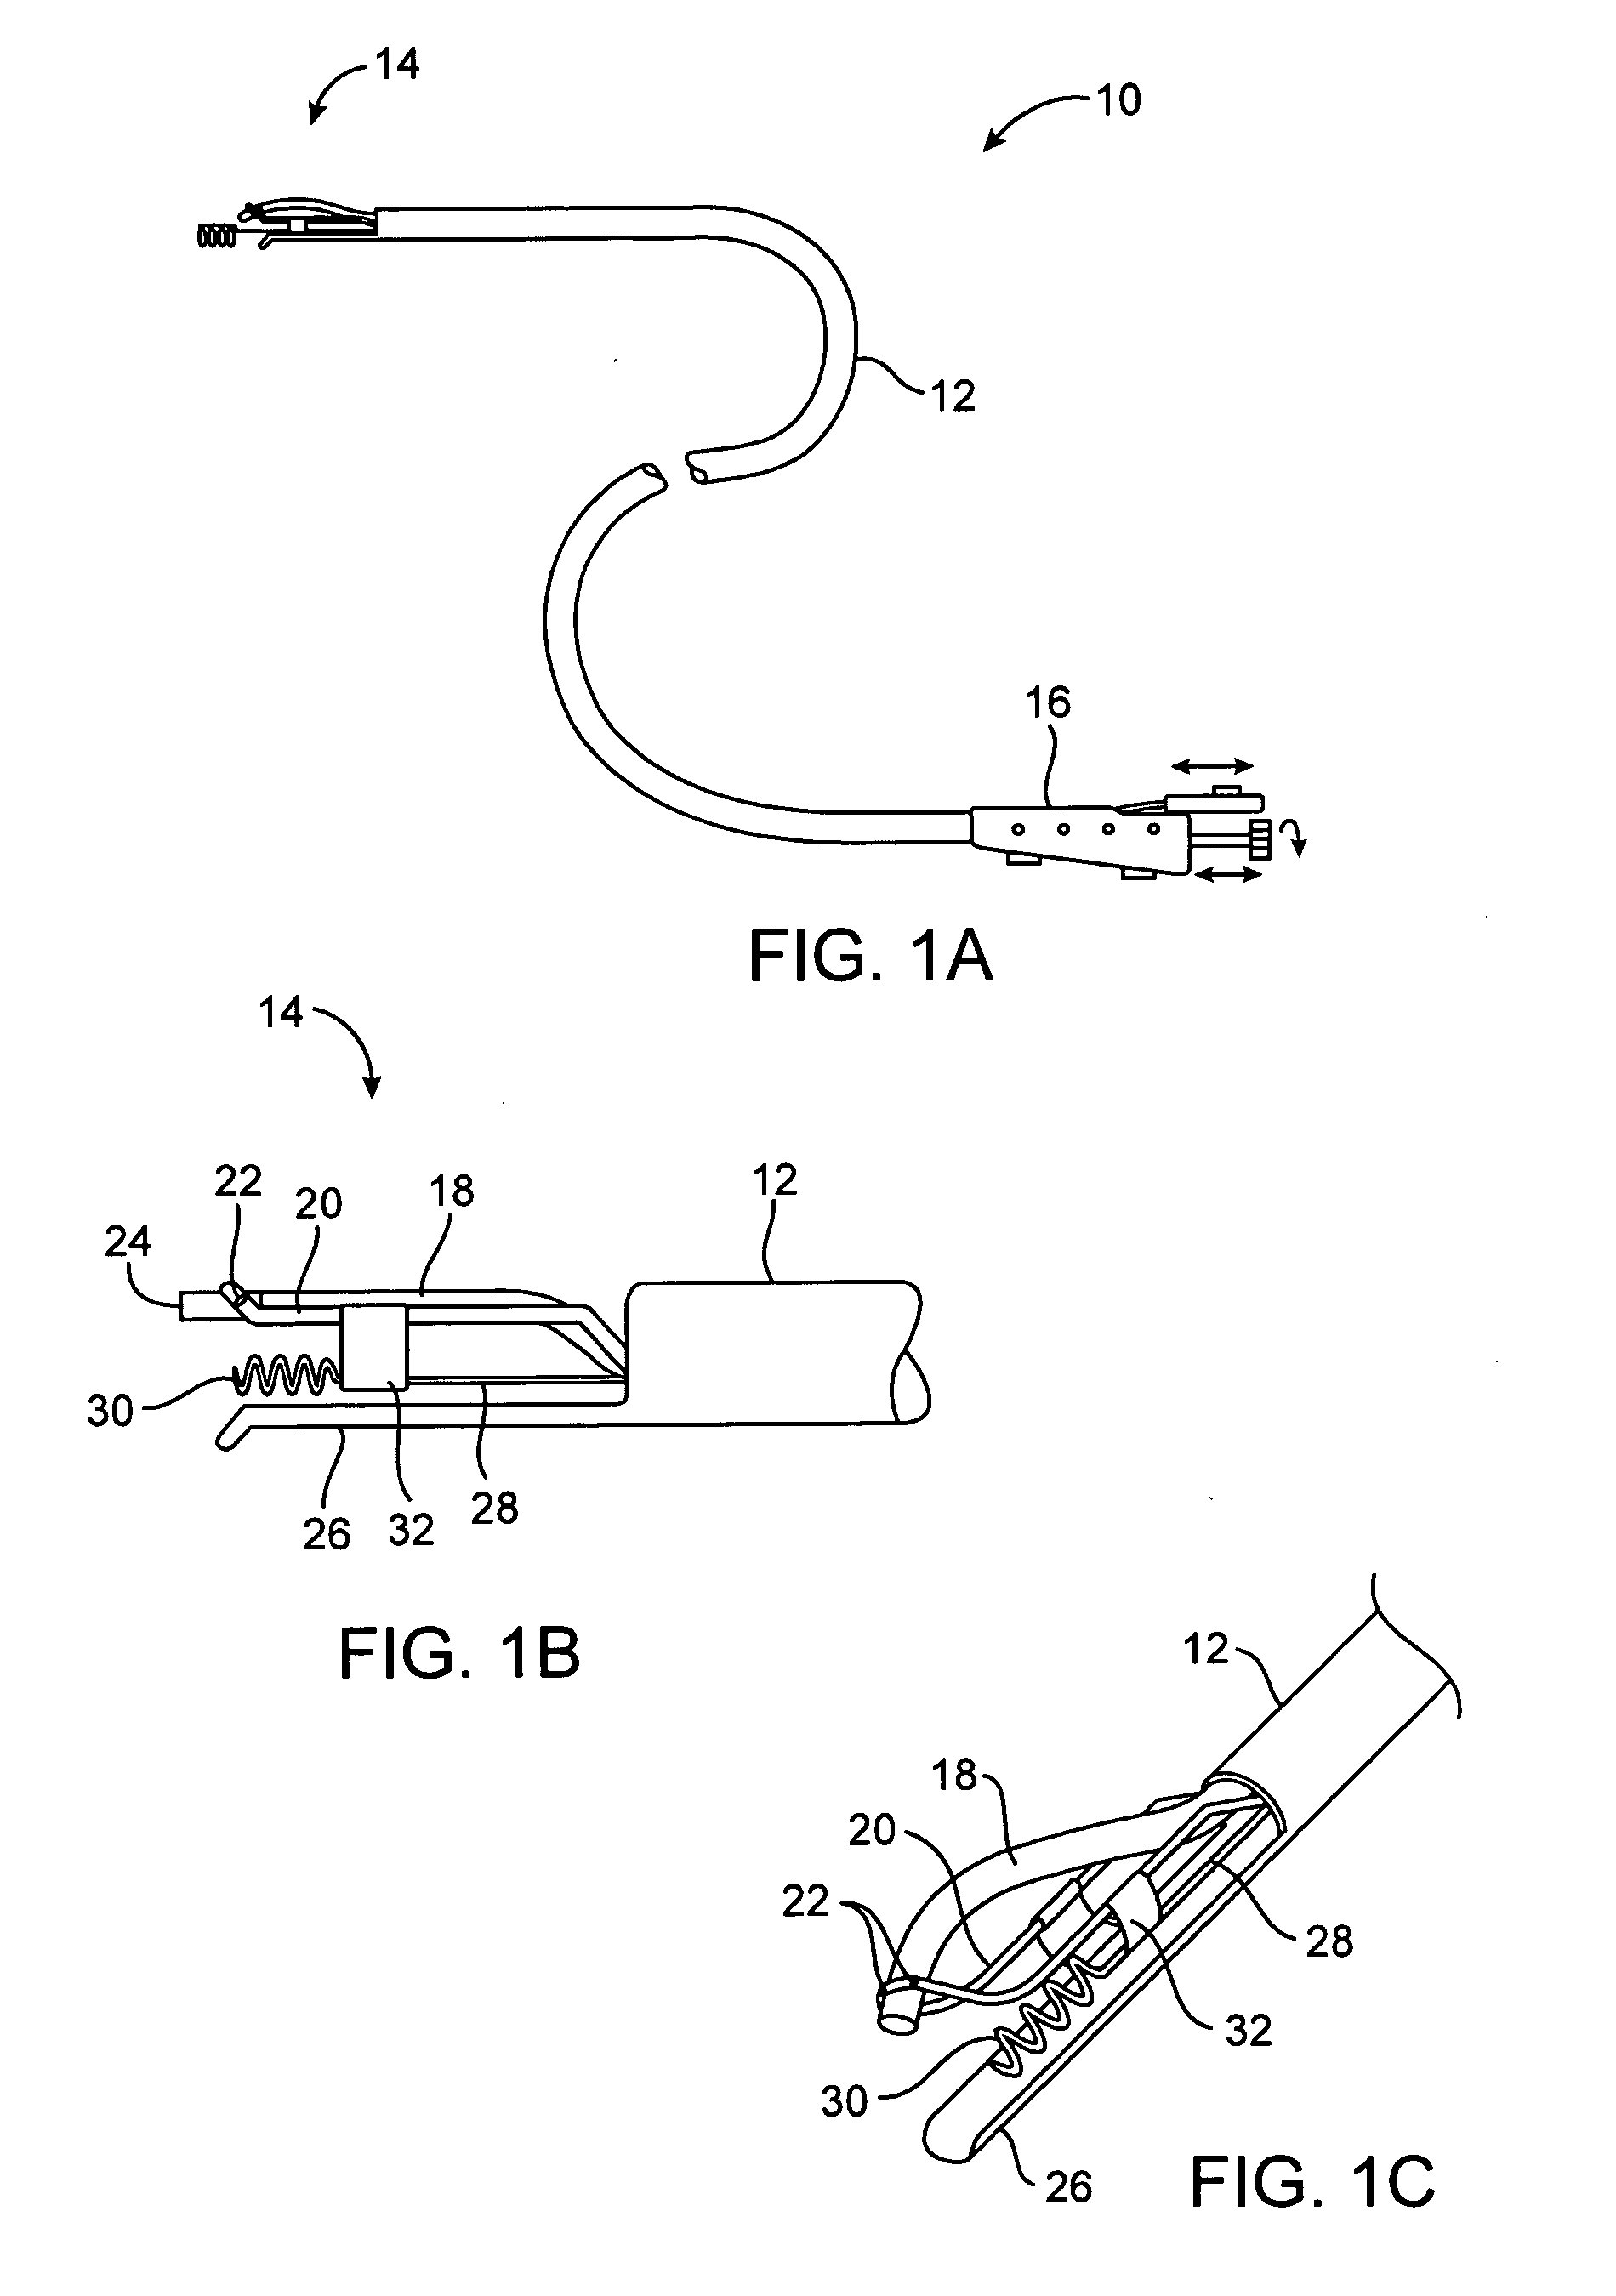 Apparatus and methods for achieving prolonged maintenance of gastrointestinal tissue folds